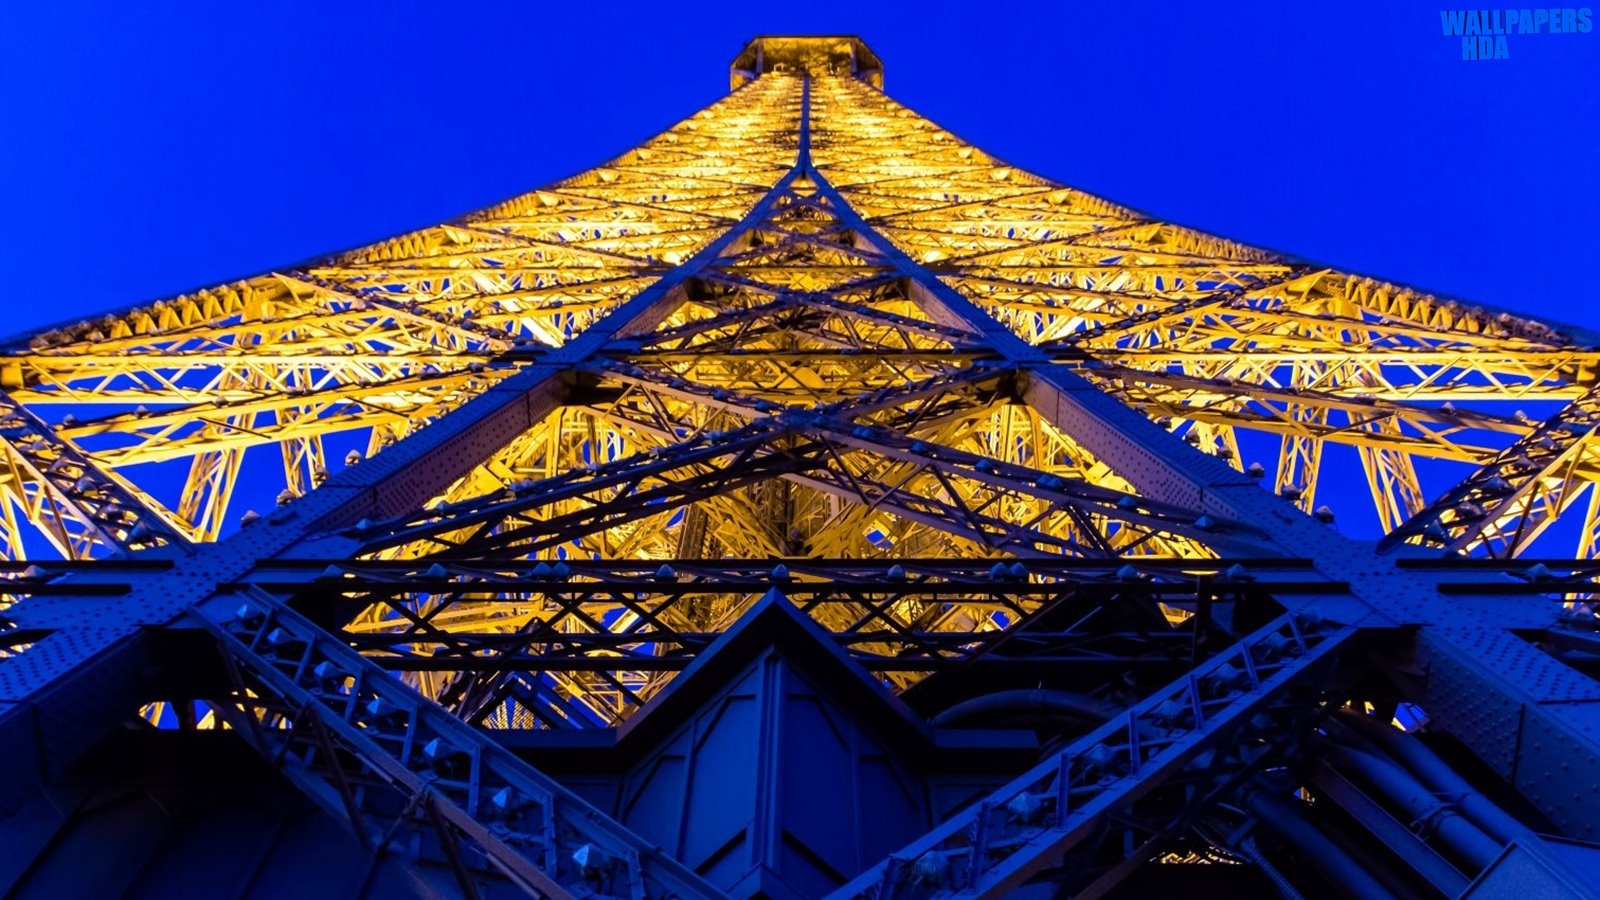 Eiffel tower blue and yellow wallpaper 1600x900